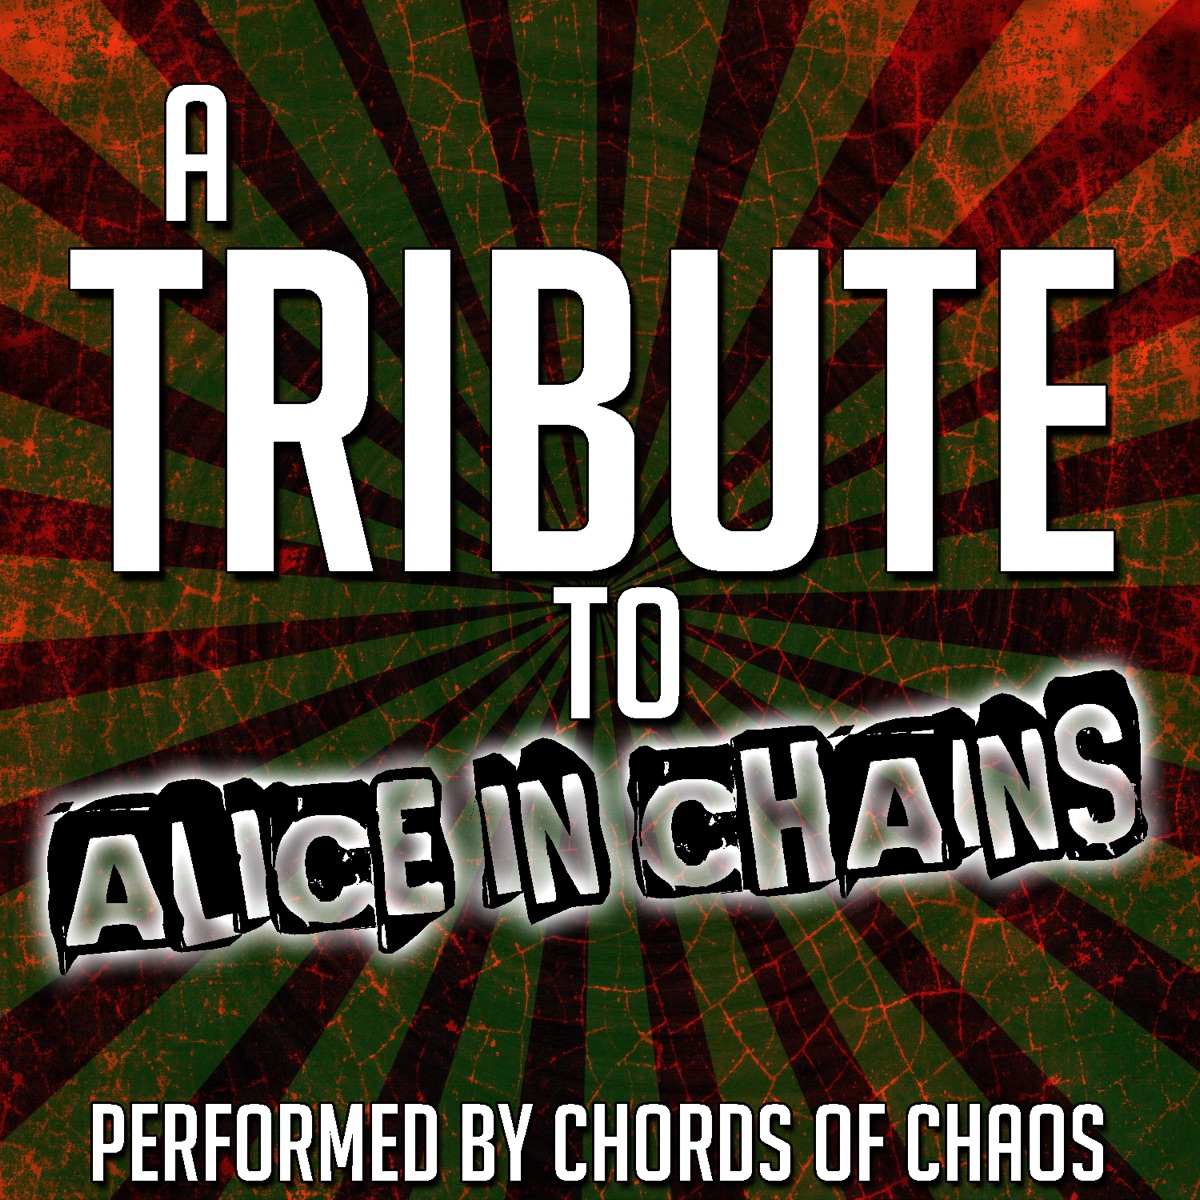 A Tribute to Alice in Chains - Album by Chords of Chaos - Apple Music